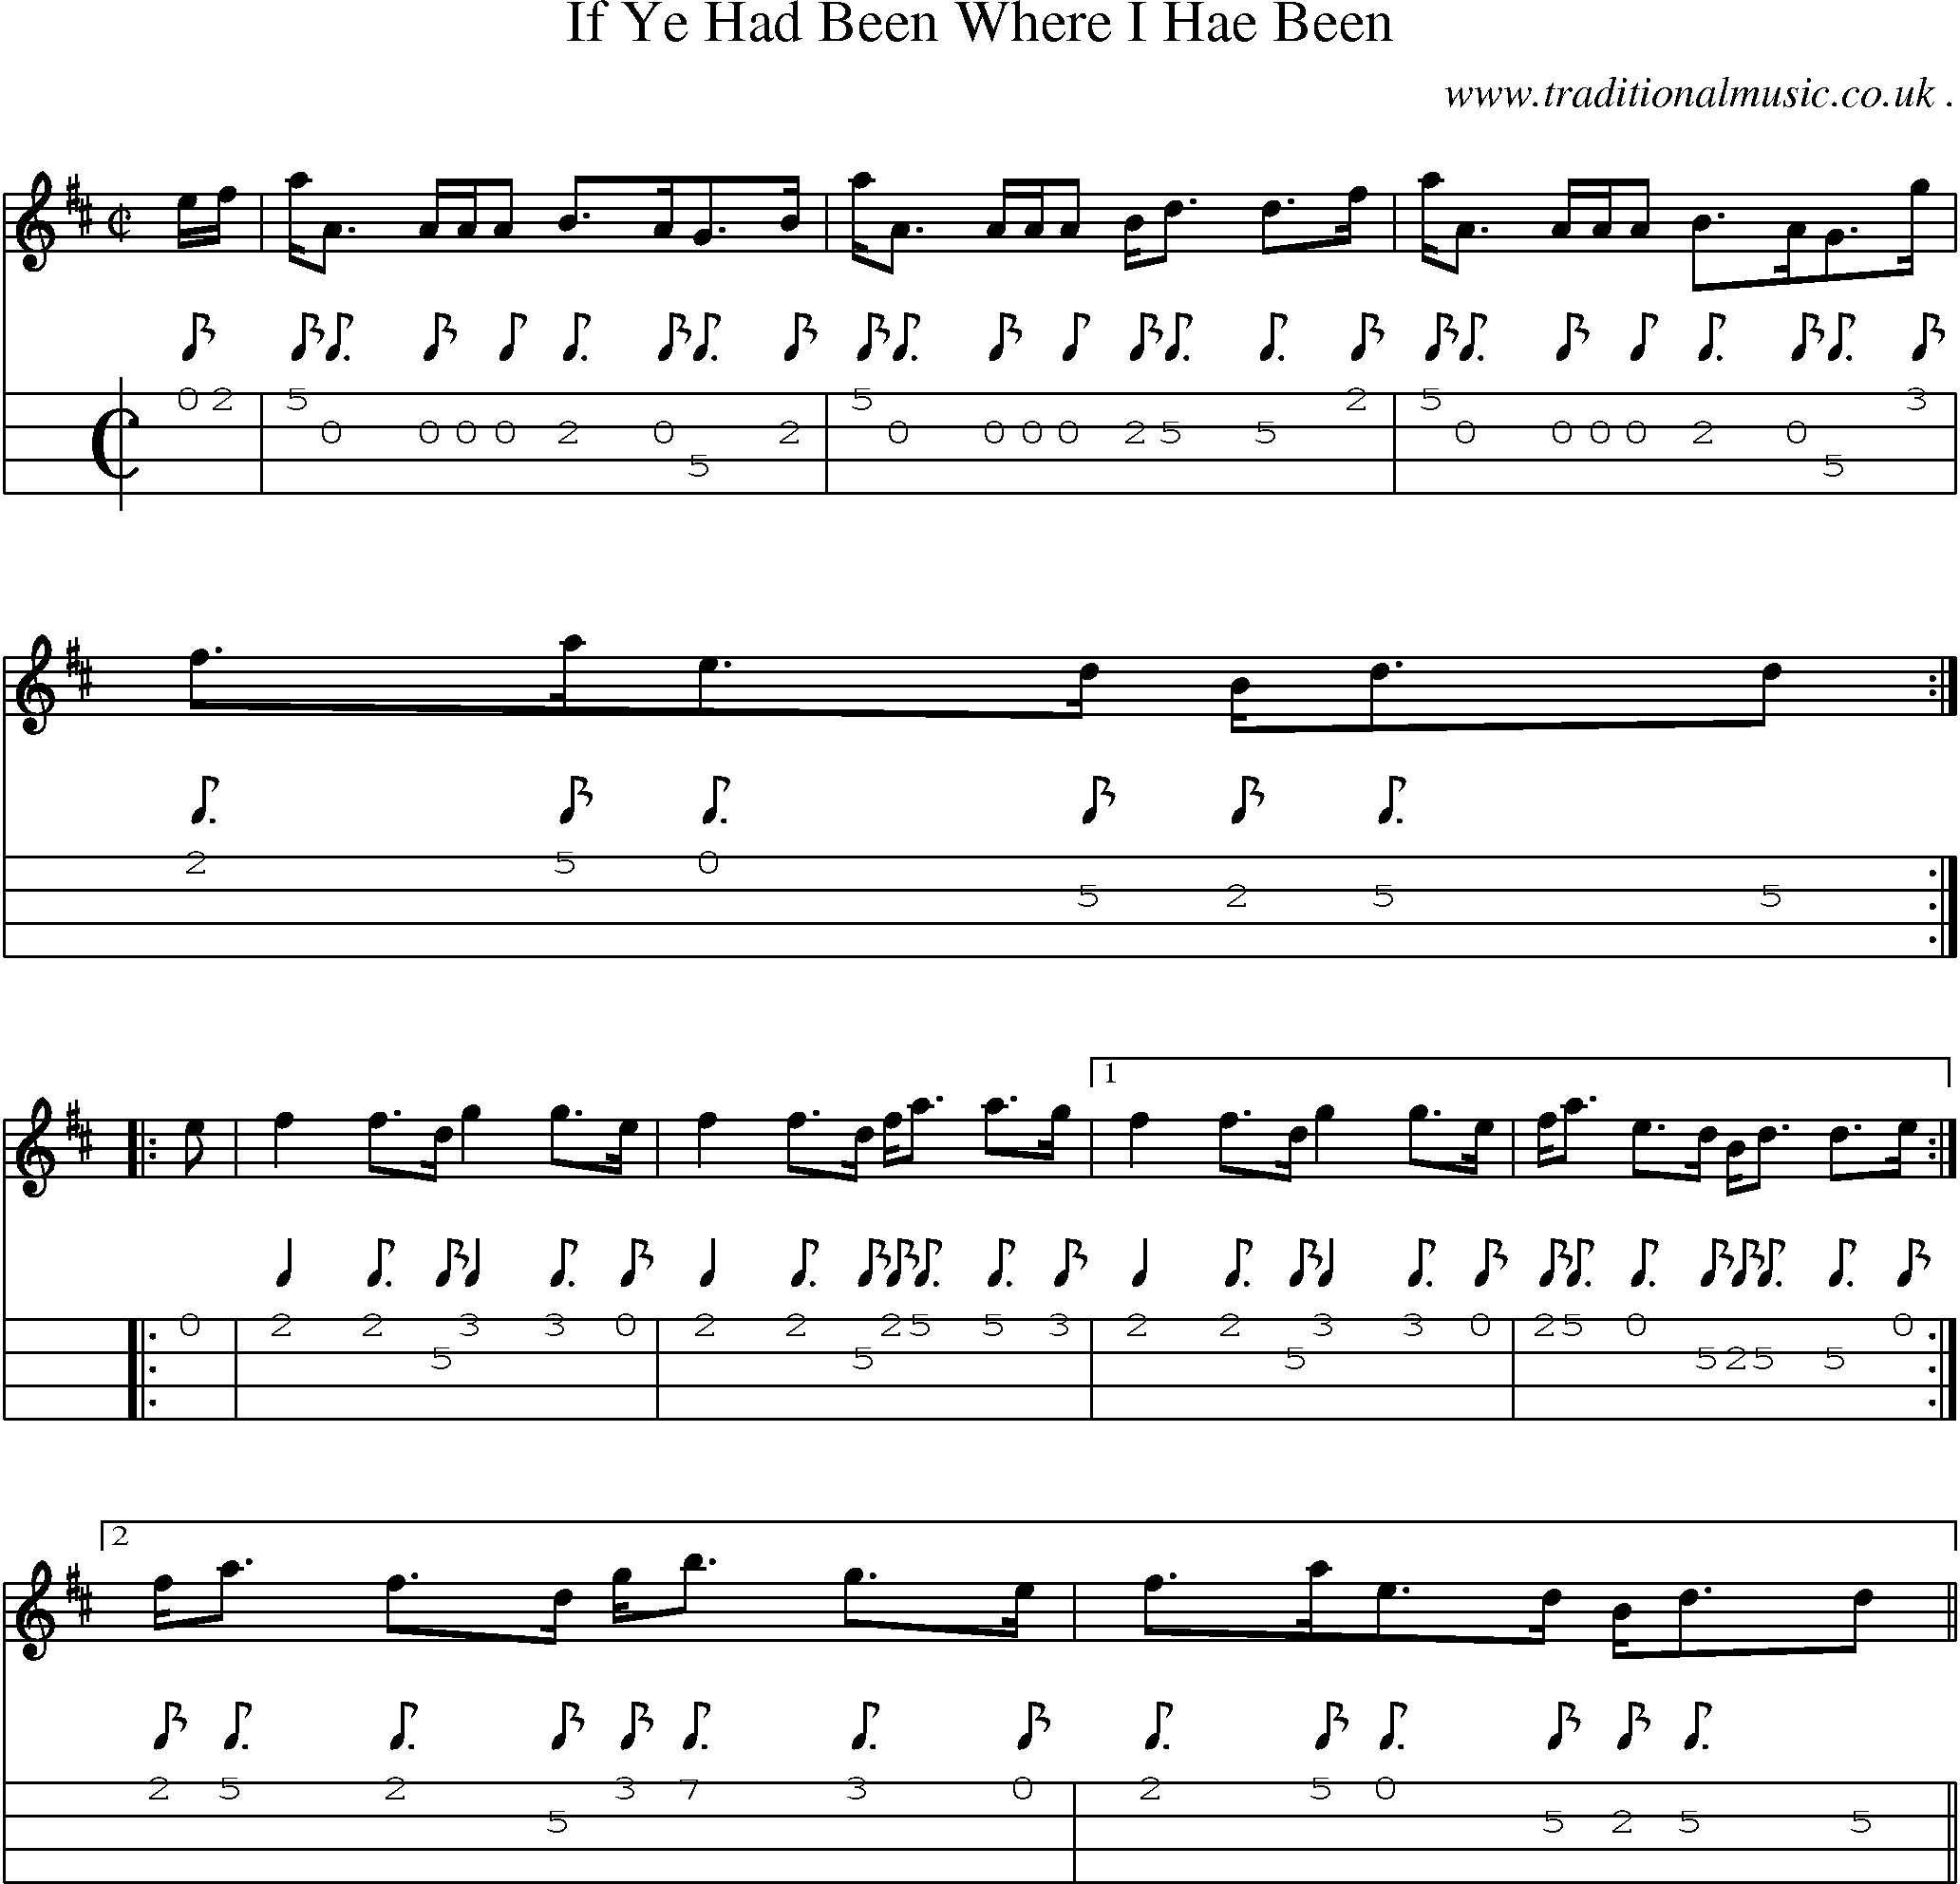 Sheet-music  score, Chords and Mandolin Tabs for If Ye Had Been Where I Hae Been